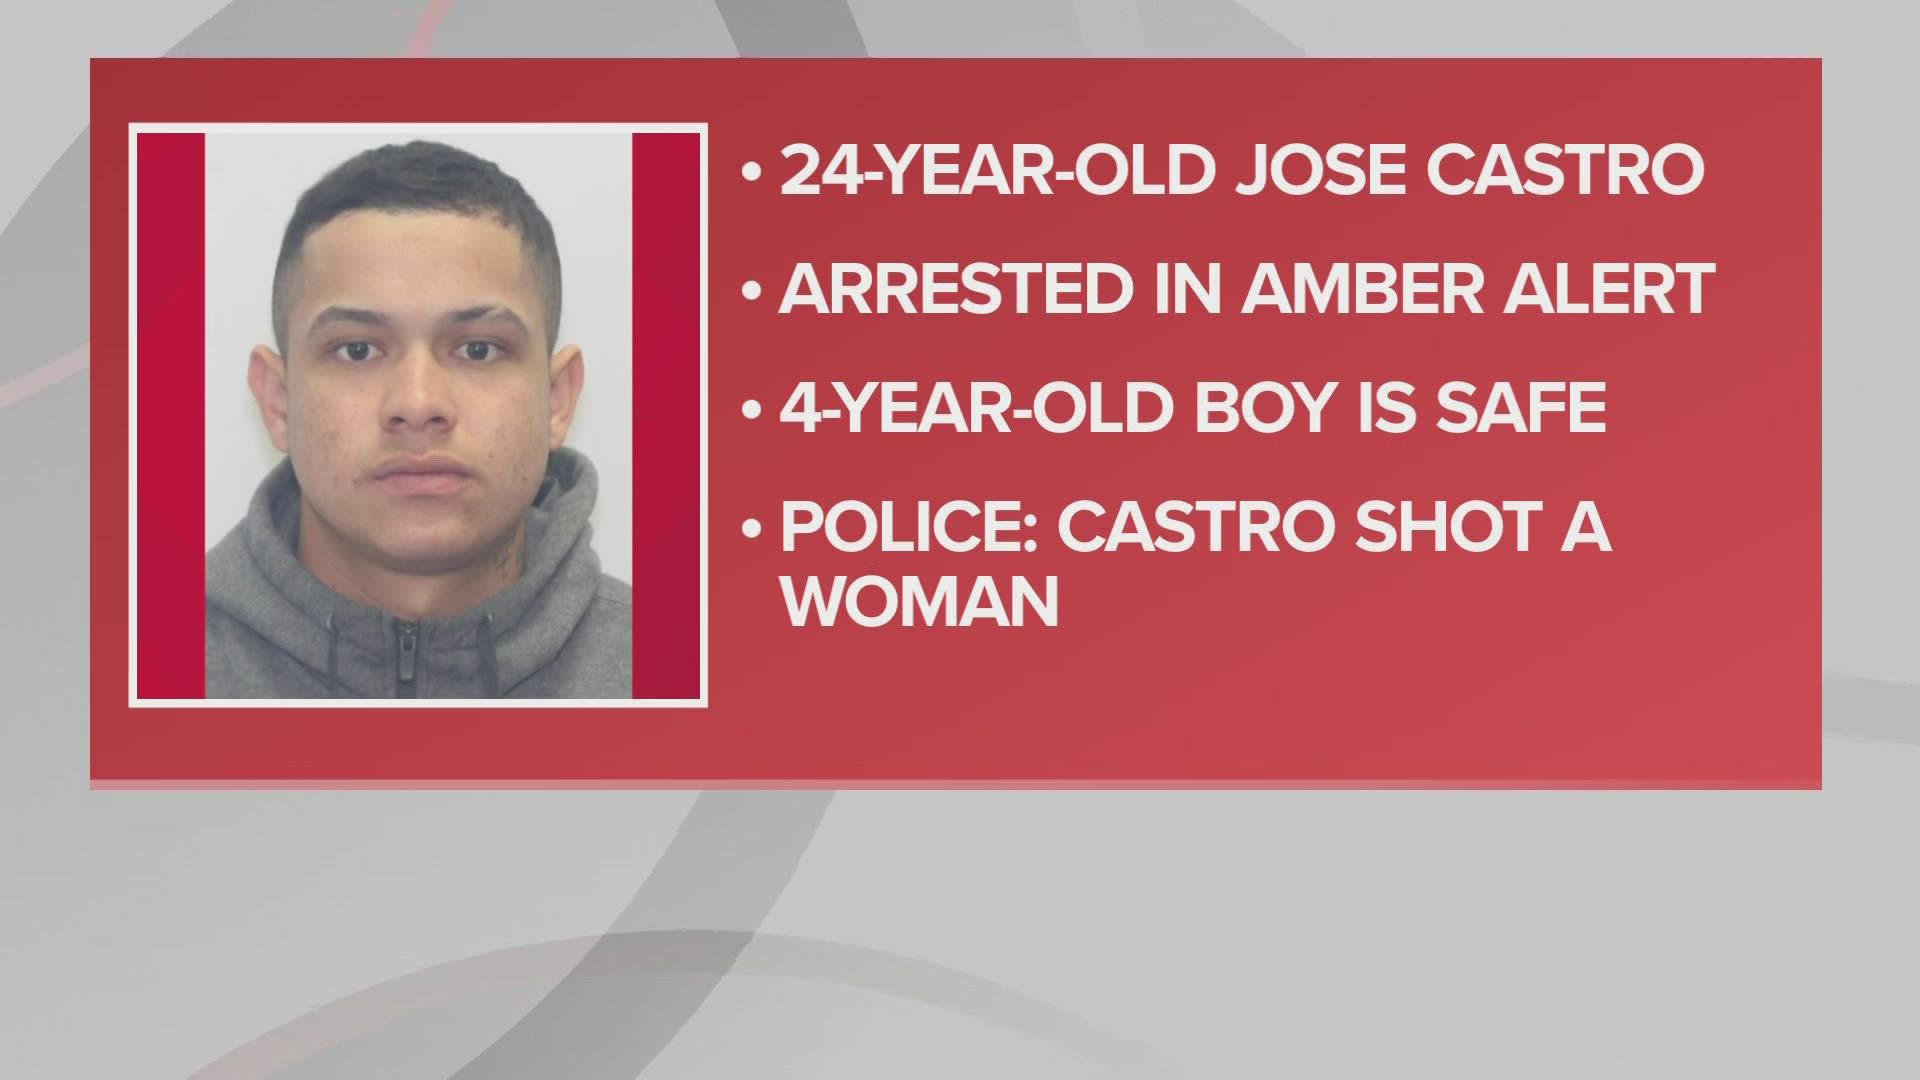 The child, Fabian Claudio-Castro, was allegedly taken by his father after the suspect shot the boy's mother. He was later 'returned unharmed to Akron detectives.'